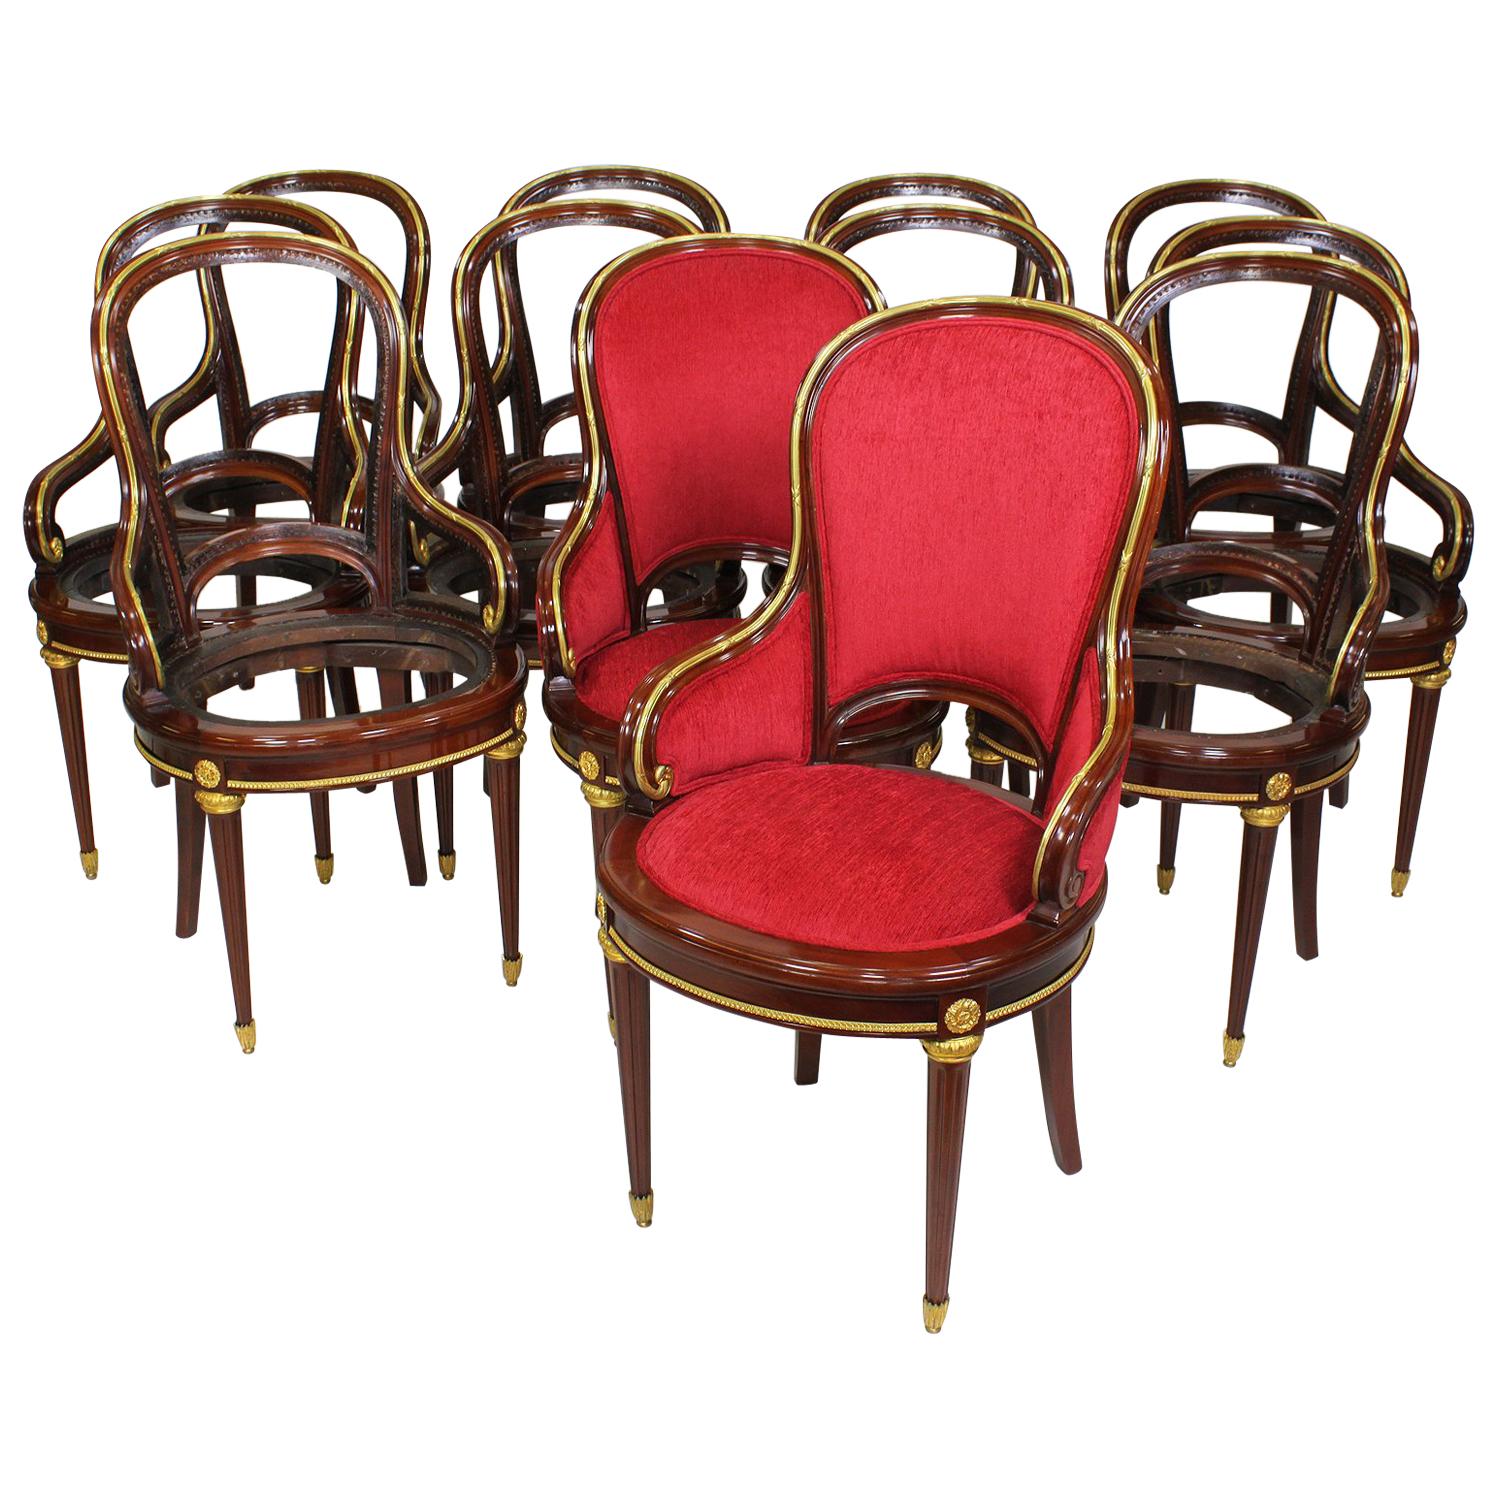 Set of Twelve French Louis XVI Style Ormolu Mounted Dining Chairs